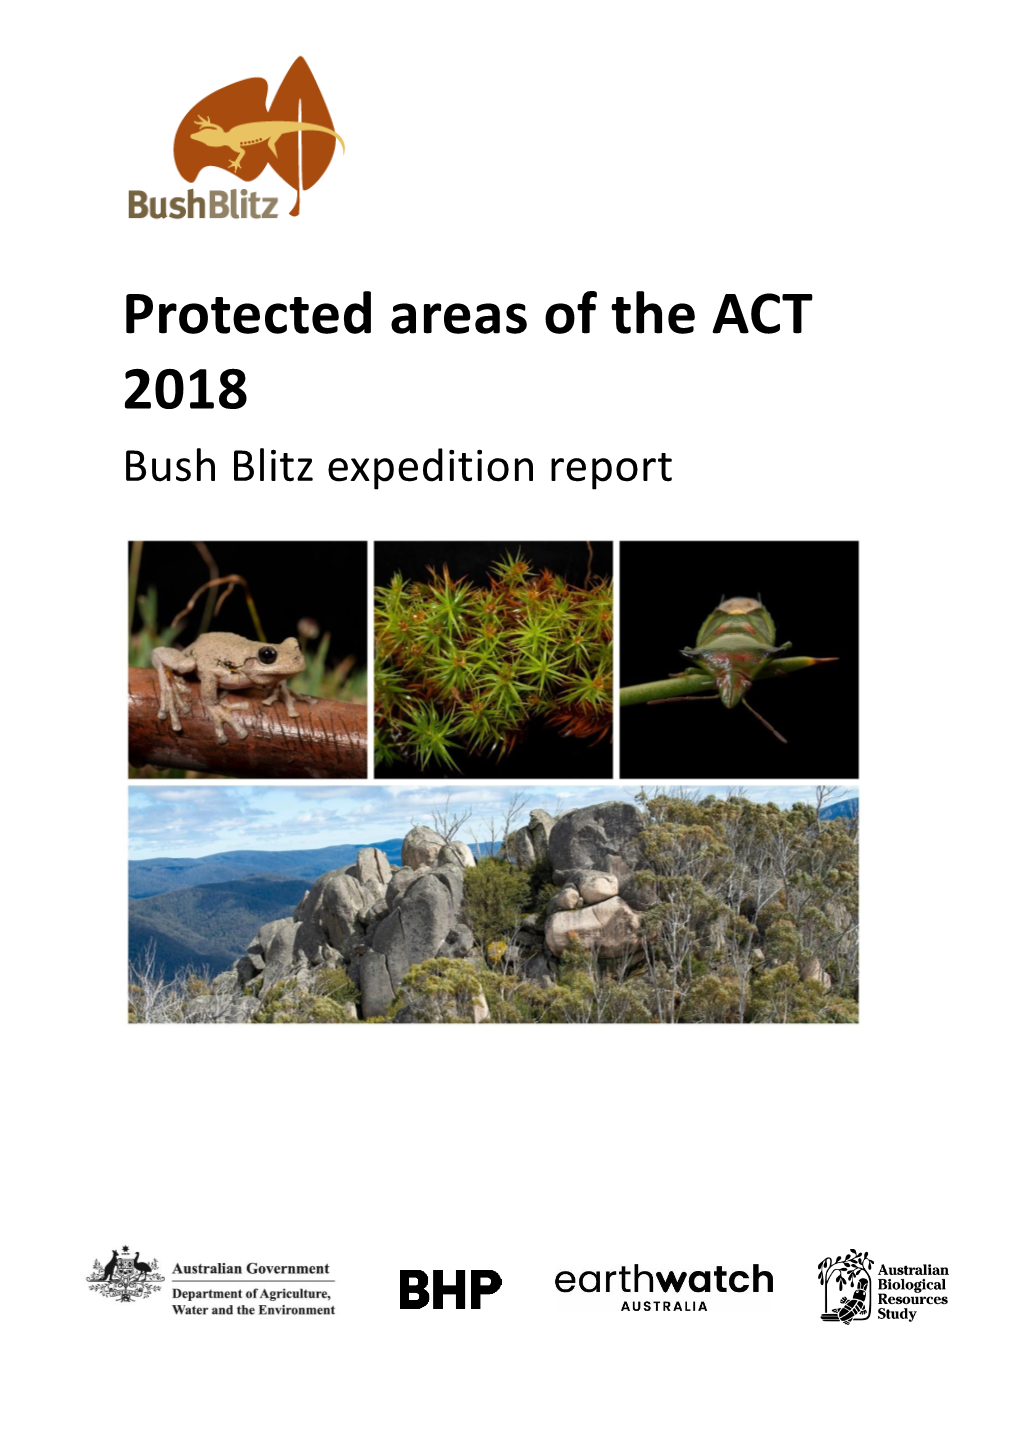 Protected Areas of the ACT 2018: Bush Blitz Expedition Report, Department of Agriculture, Water and the Environment, Canberra